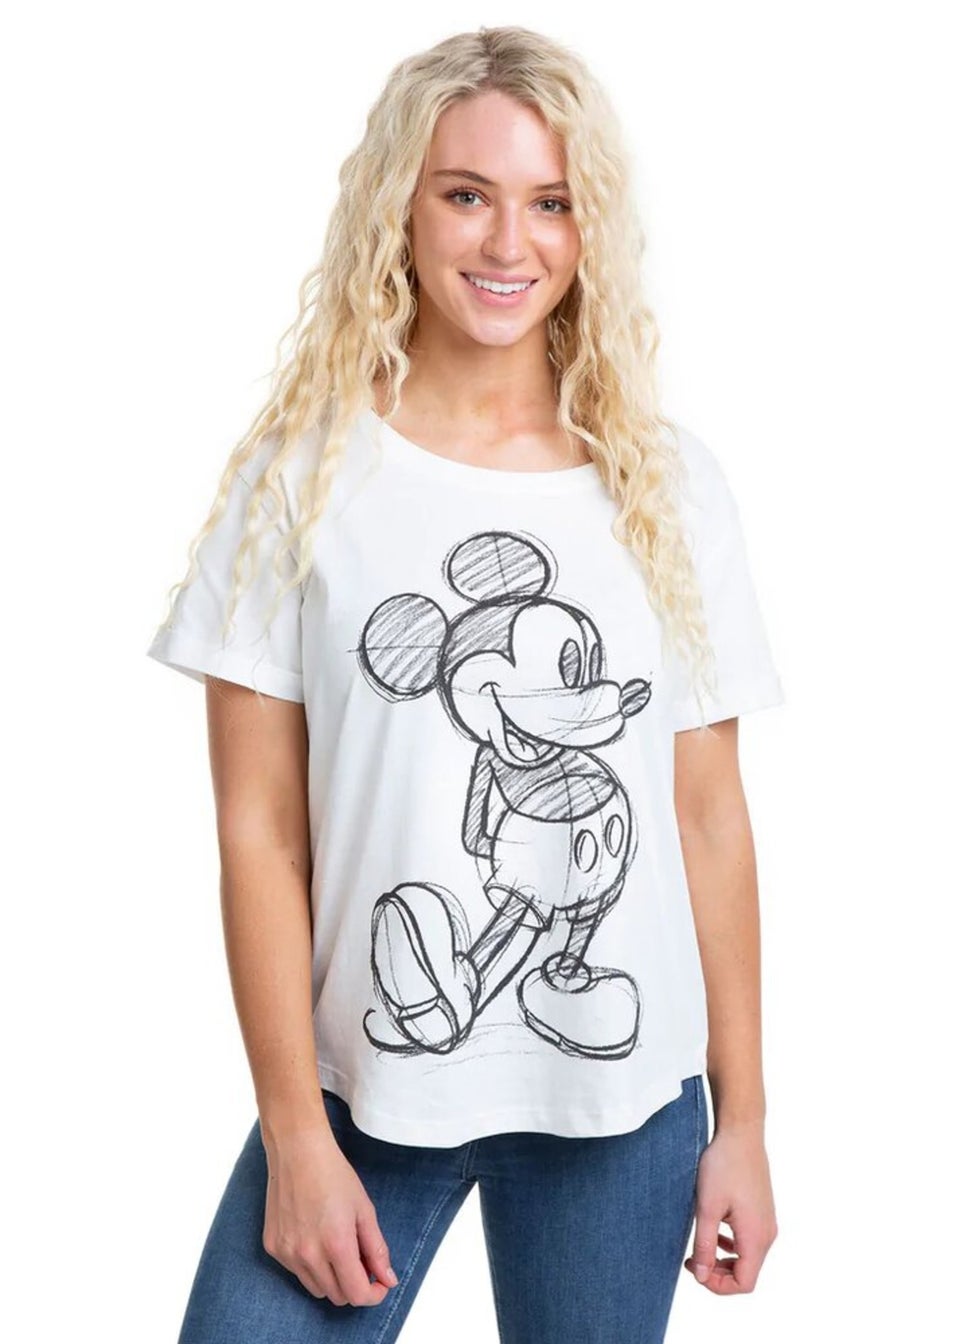 Mickey Mouse Clothes & Merchandise - Matalan